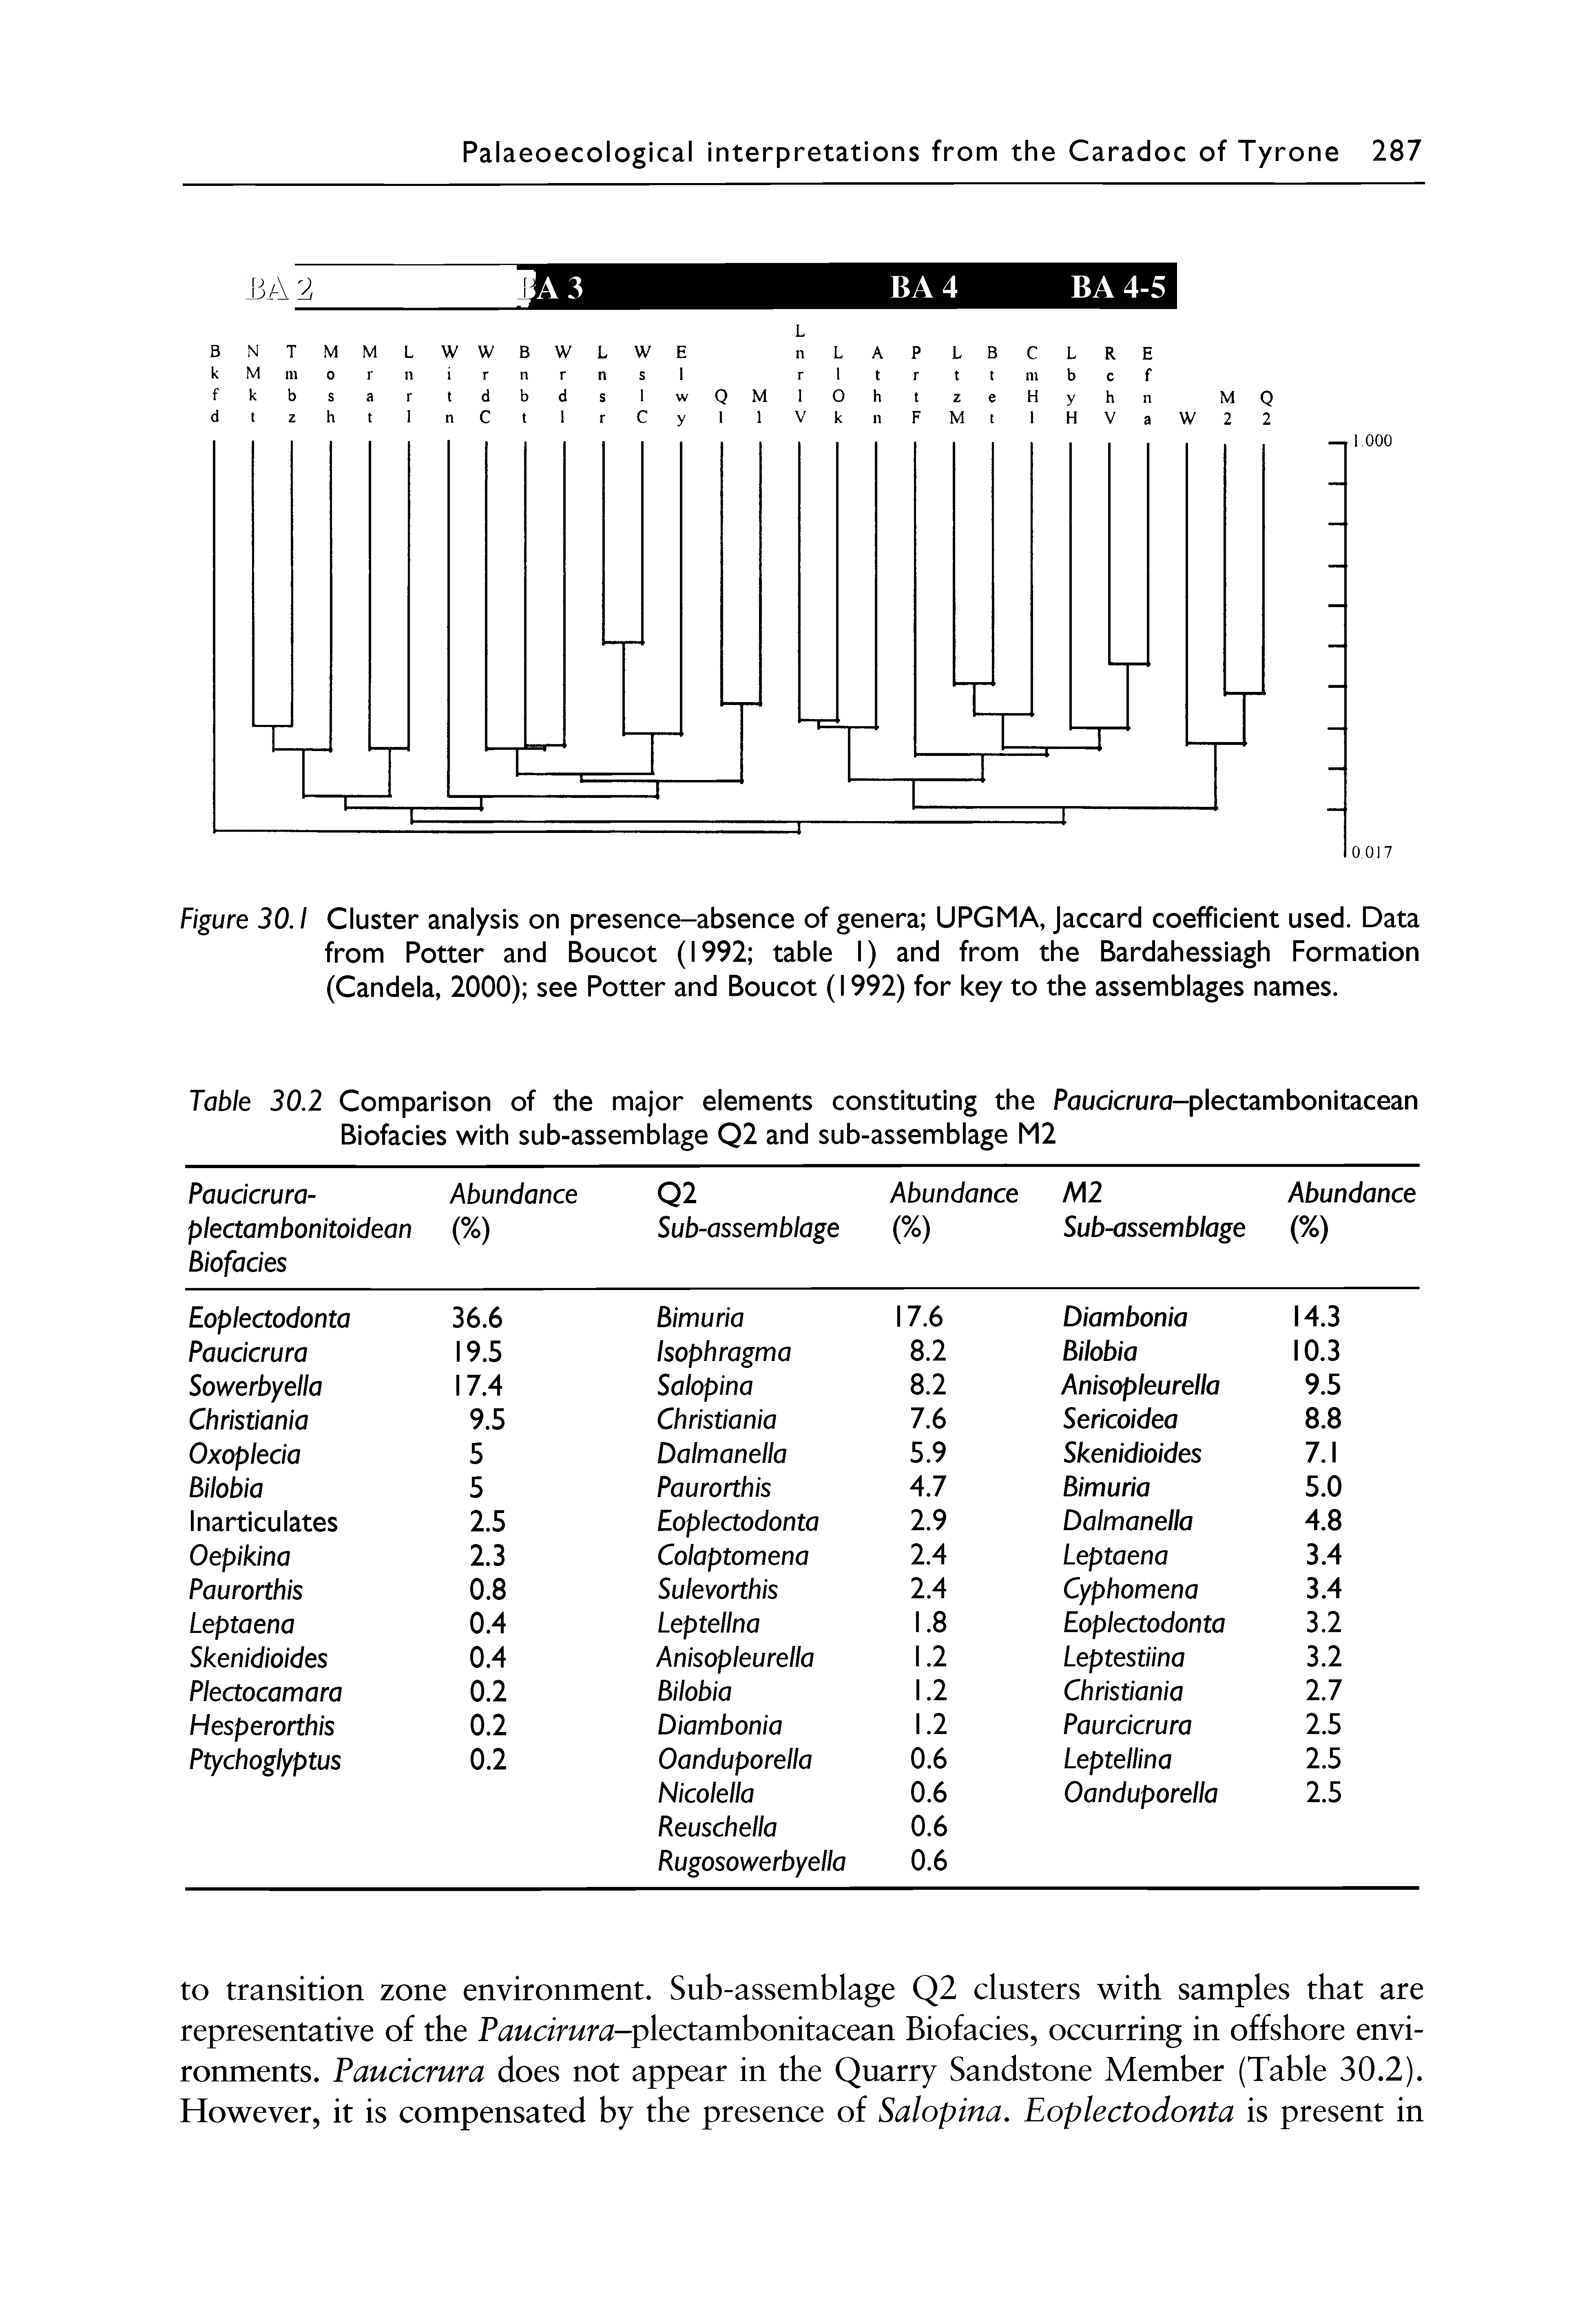 Figure 30.1 Cluster analysis on presence-absence of genera UPGMA, Jaccard coefficient used. Data from Potter and Boucot (1992 table I) and from the Bardahessiagh Formation (Candela, 2000) see Potter and Boucot (1992) for key to the assemblages names.